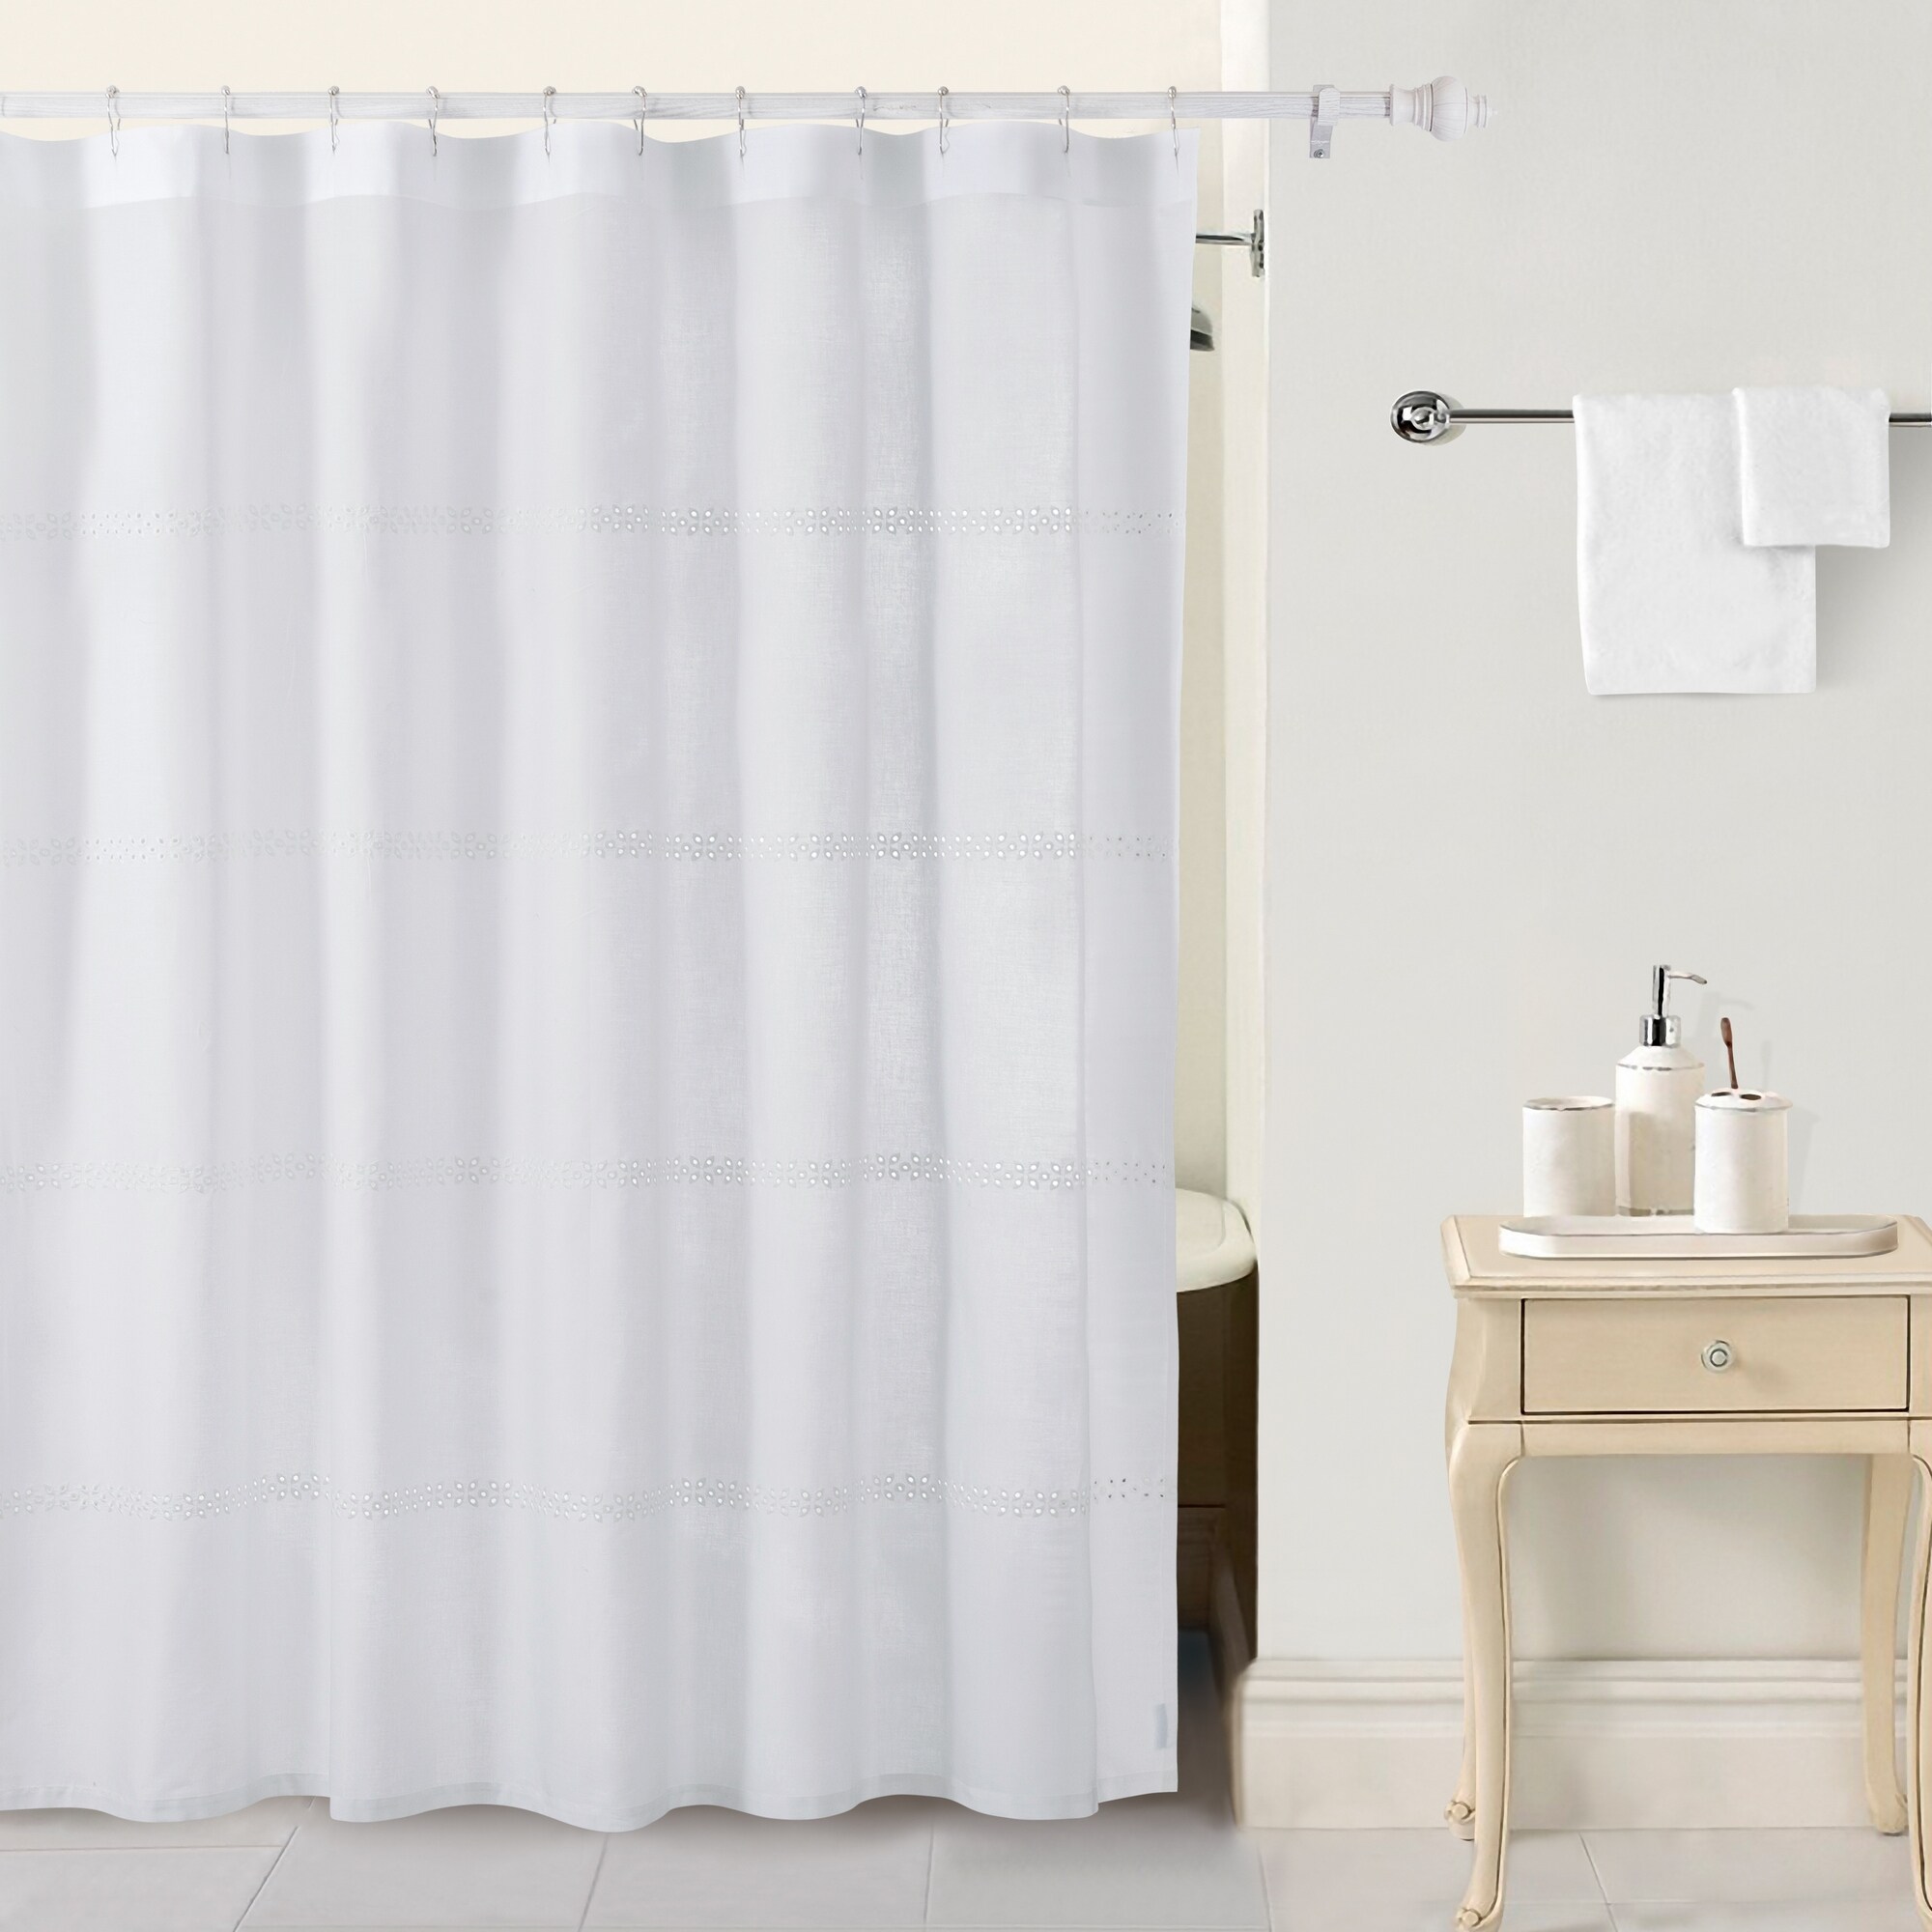 Country Living Eyelet Shower Curtain 